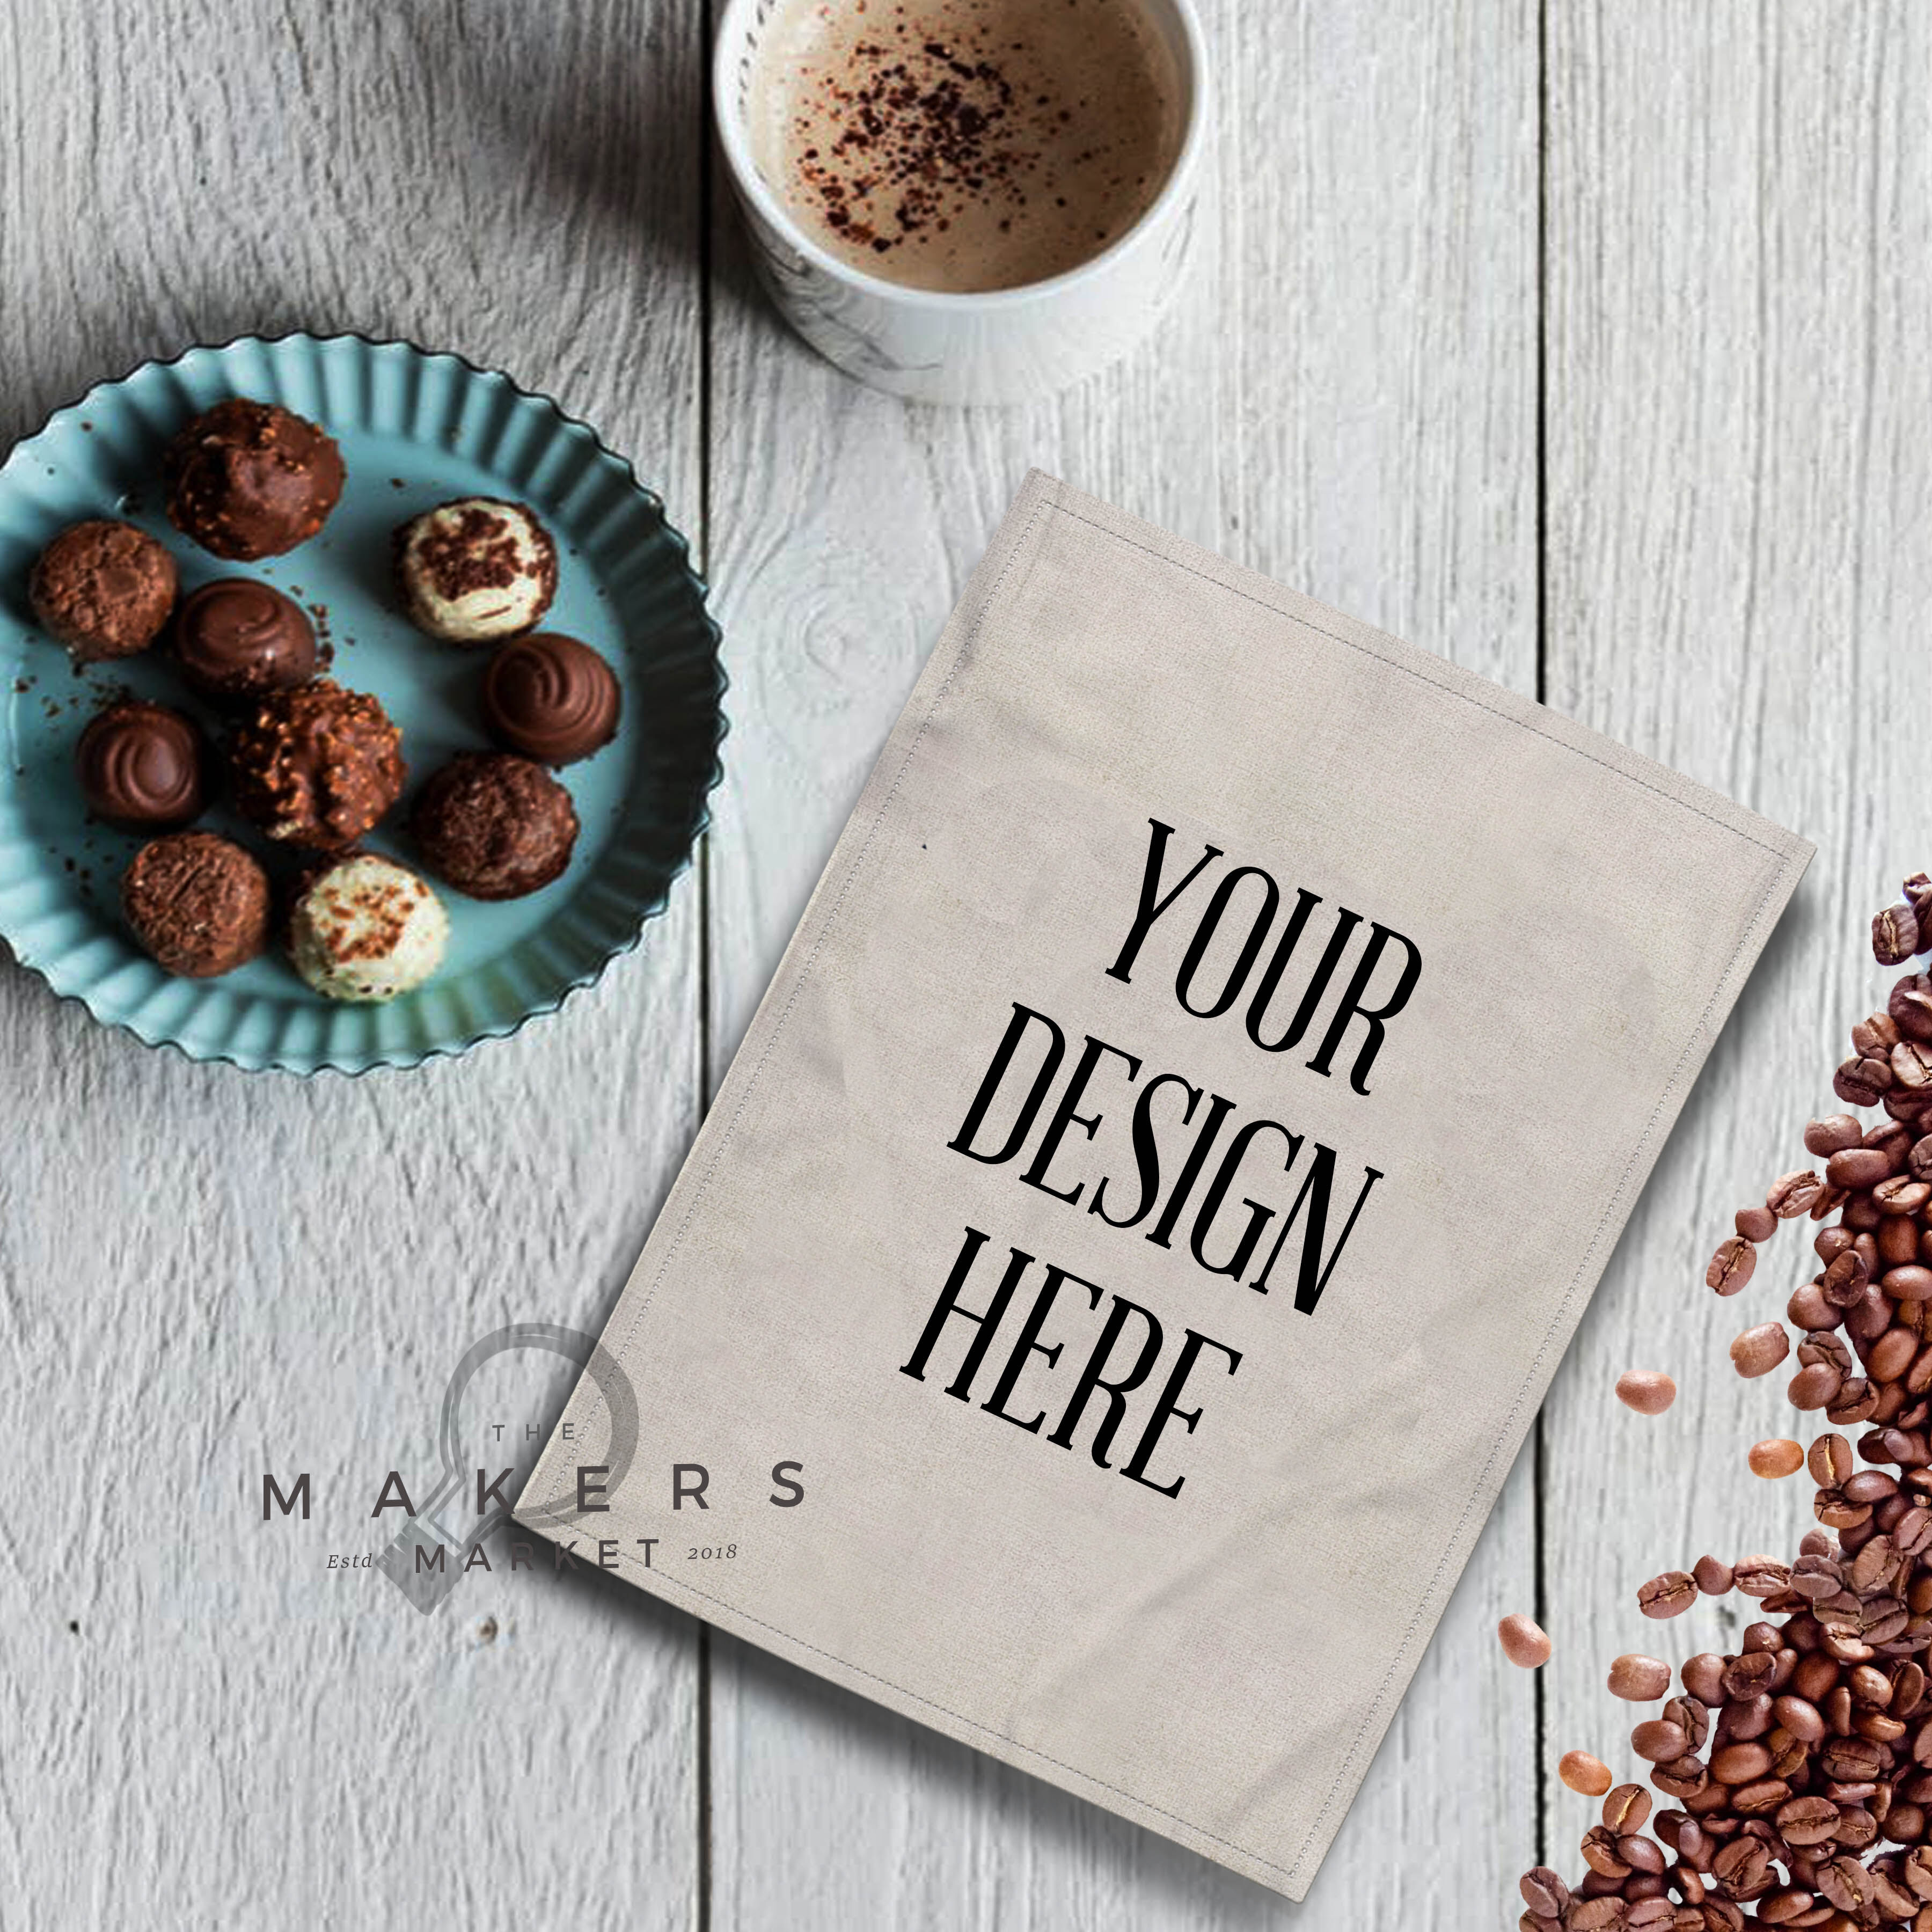 Download Tea Towel Mockup/ Styled Tea Towel Photo/ Kitchen Design/ Product Mock By The Makers Market ...